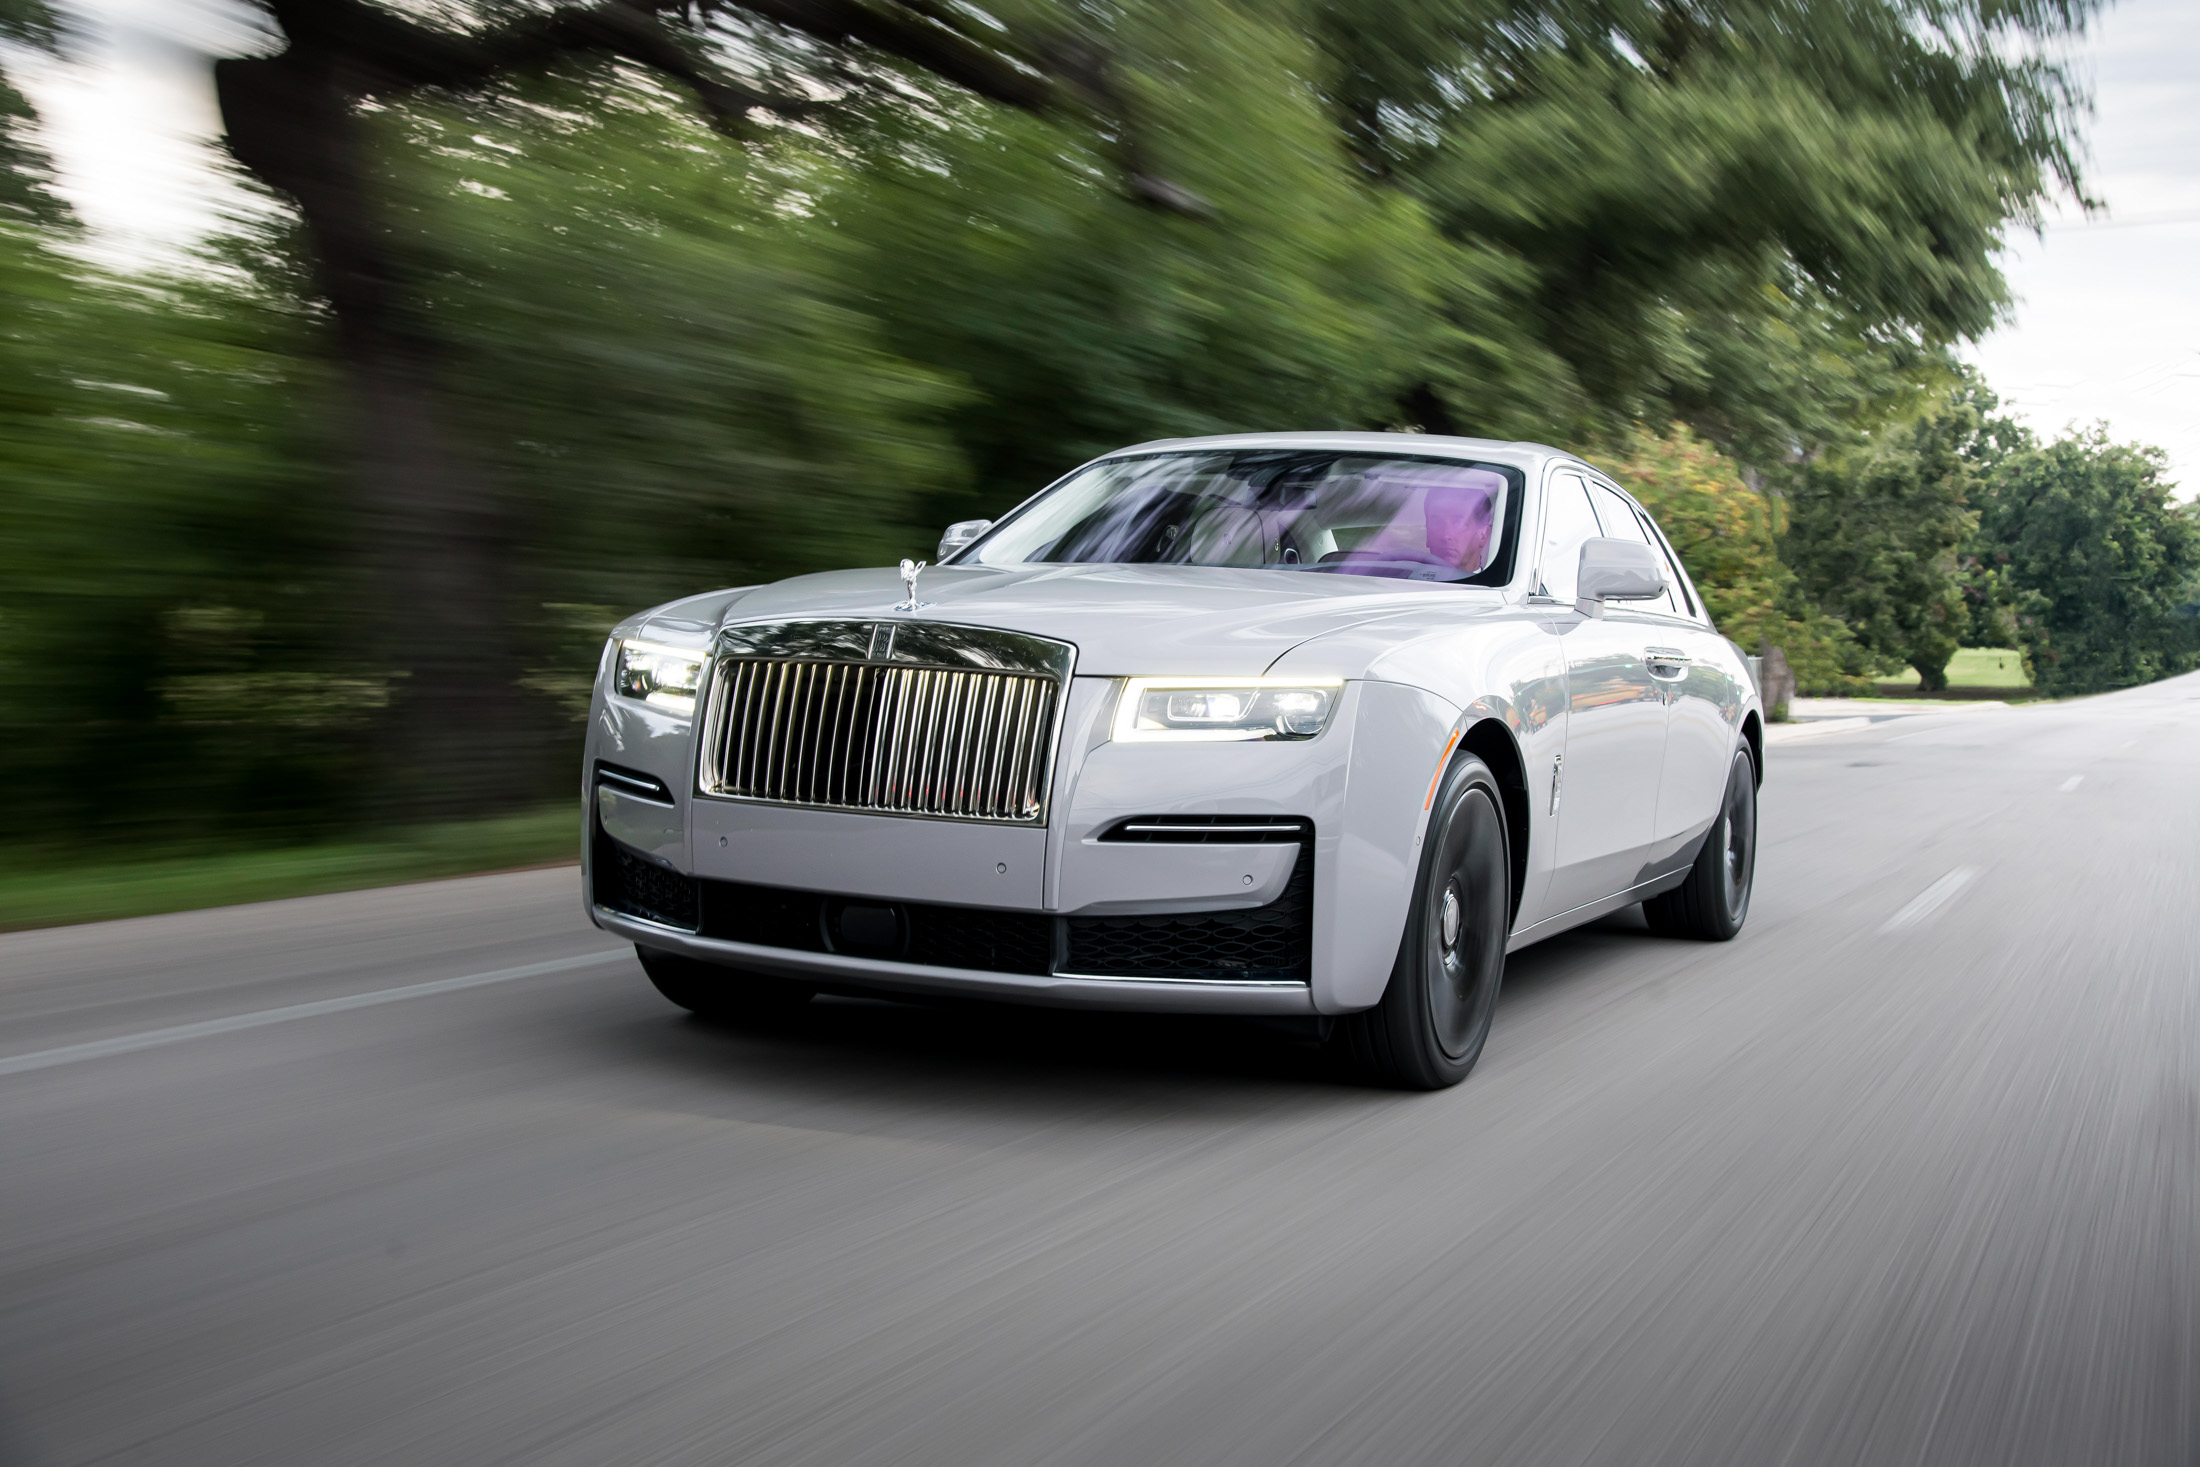 Rolls Royce Phantom or Bentley Flying Spur Which Is a Better Luxury Car